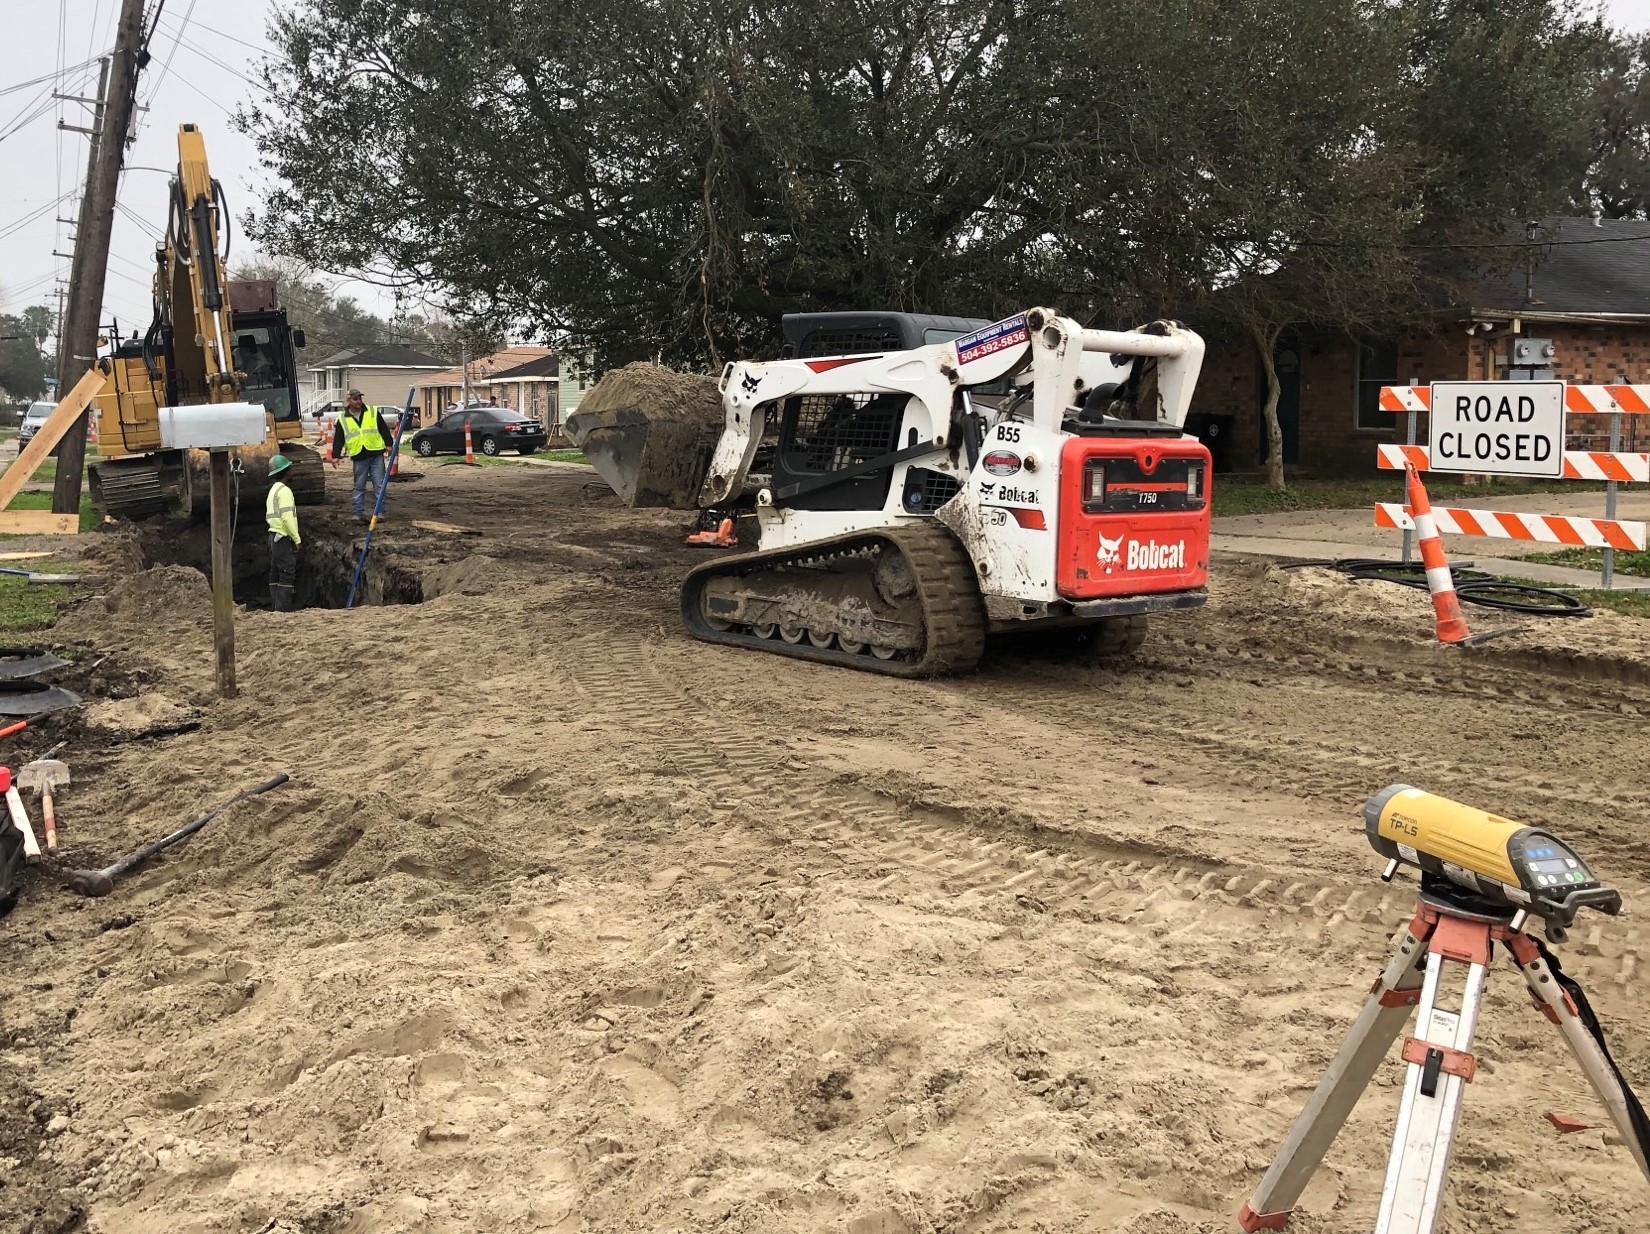 DRAIN LINE WORK CONTINUES IN MILNEBURG GROUP A